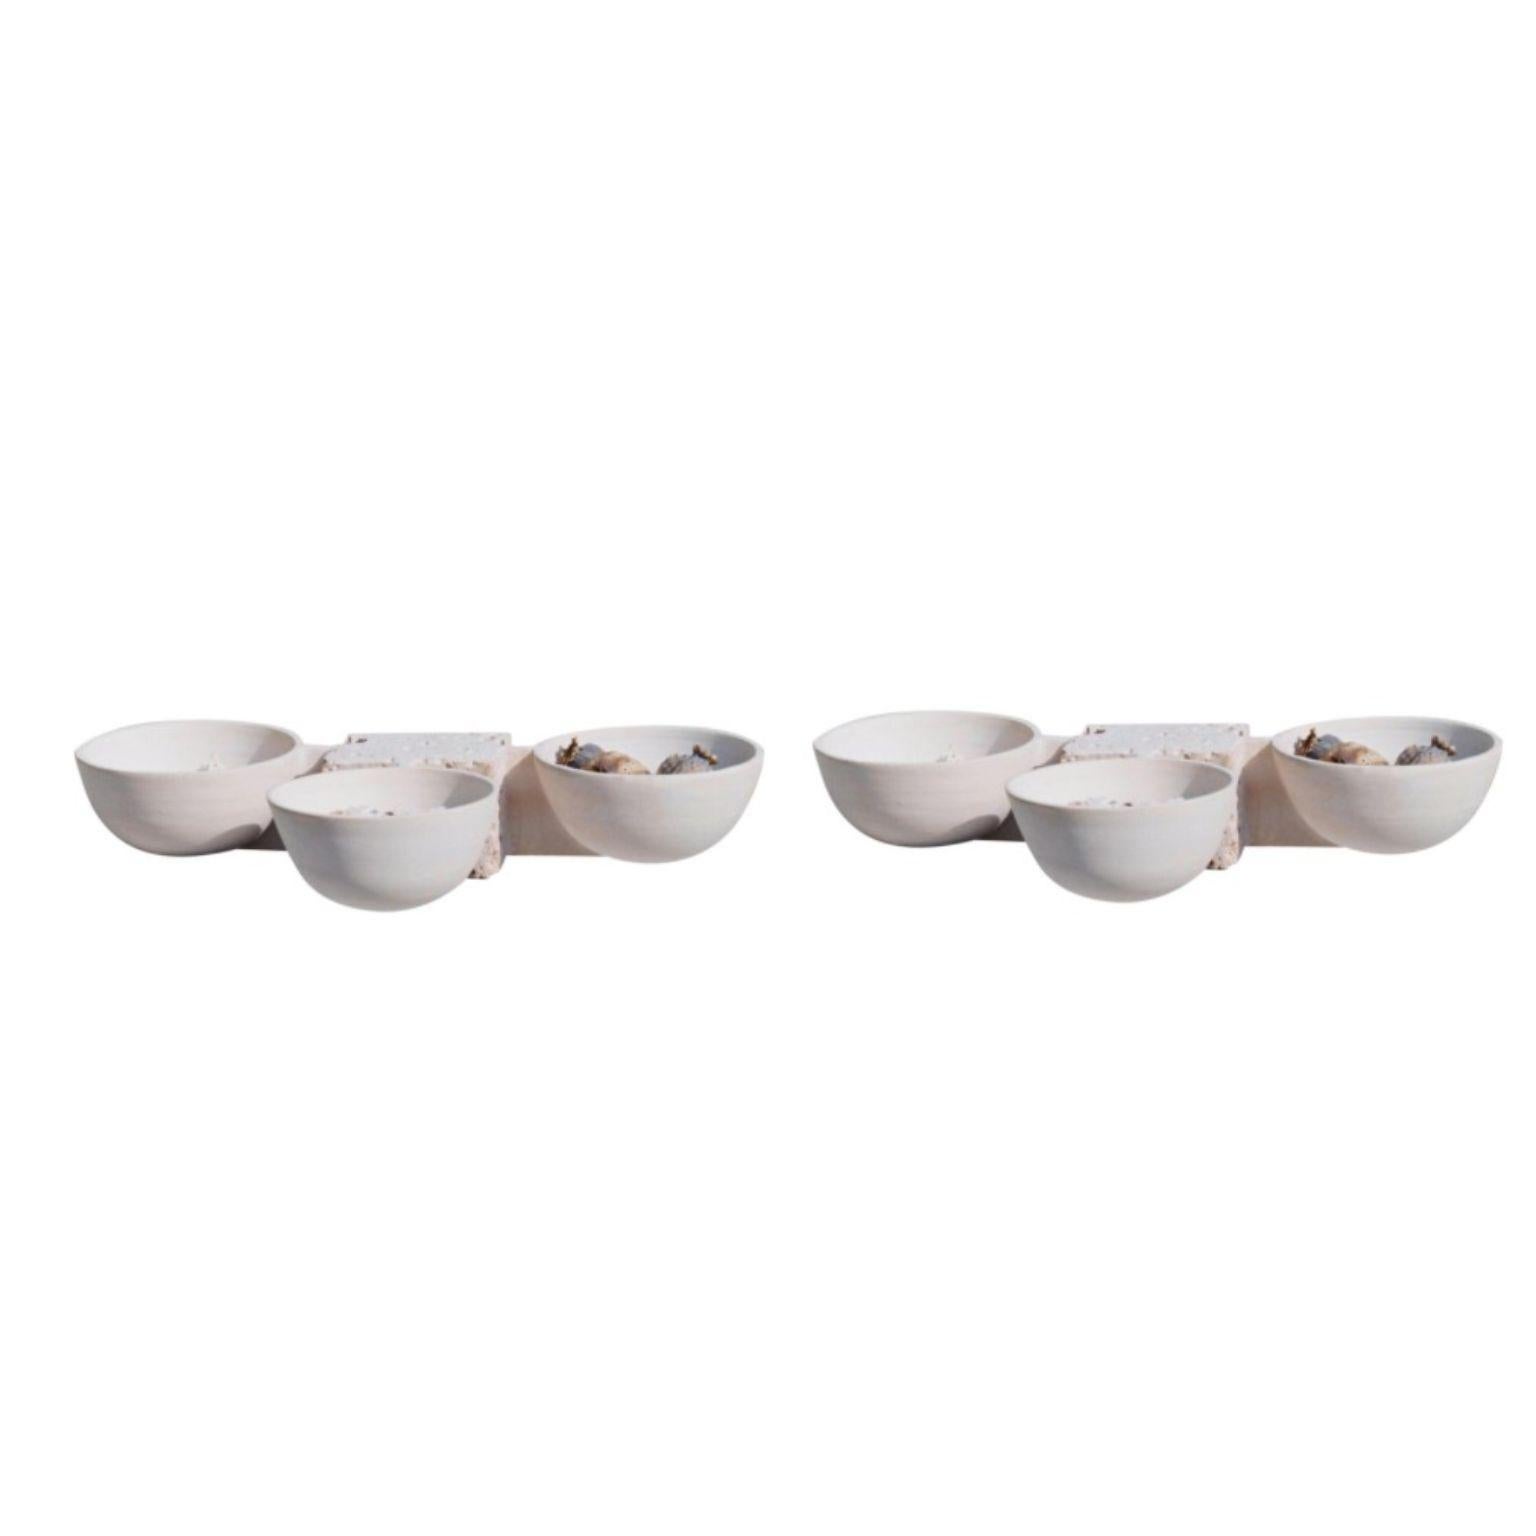 Set of 2 triple bowls by Turbina
Future archeology
Dimensions: H 4.5 x W 24 x D 14 cm. Each
 Bowl diameter 8 cm
Materials: Natural / White Mayolica Fired Clay, Cast Stone

Future archeology: The Object as connection and symbol to understand past and